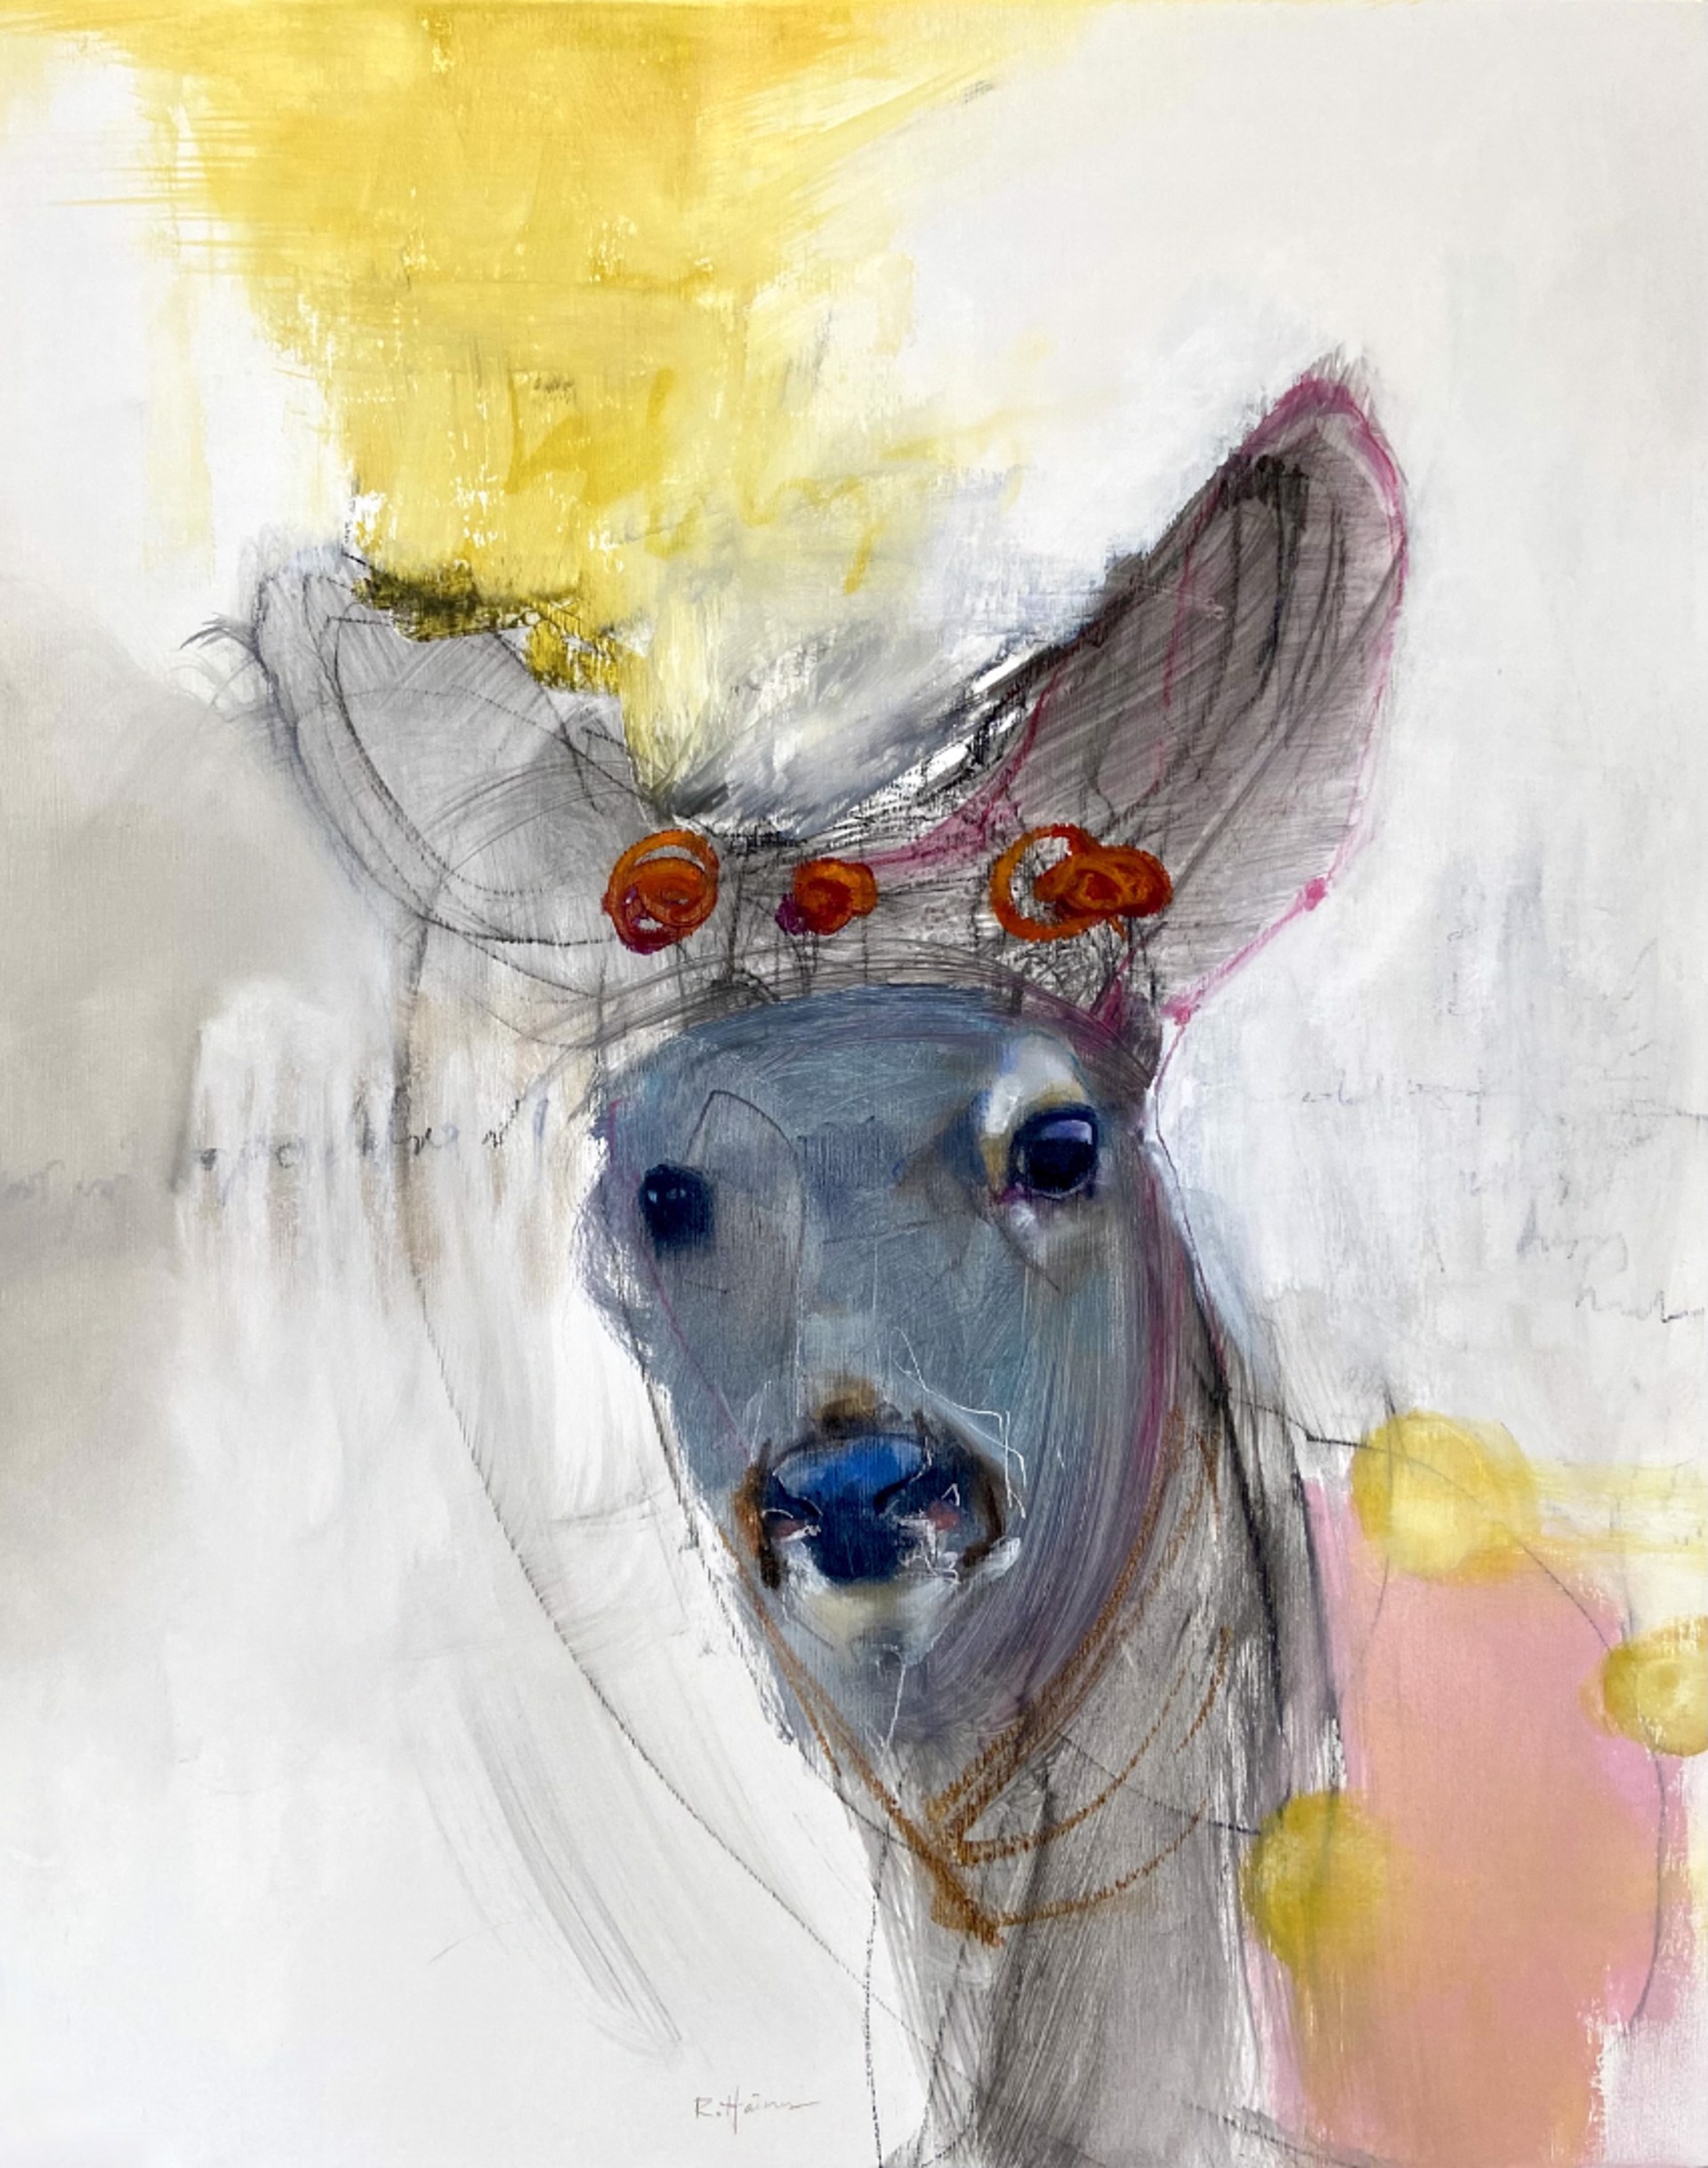 The Deer Poet and Collector of Light by Rebecca Haines